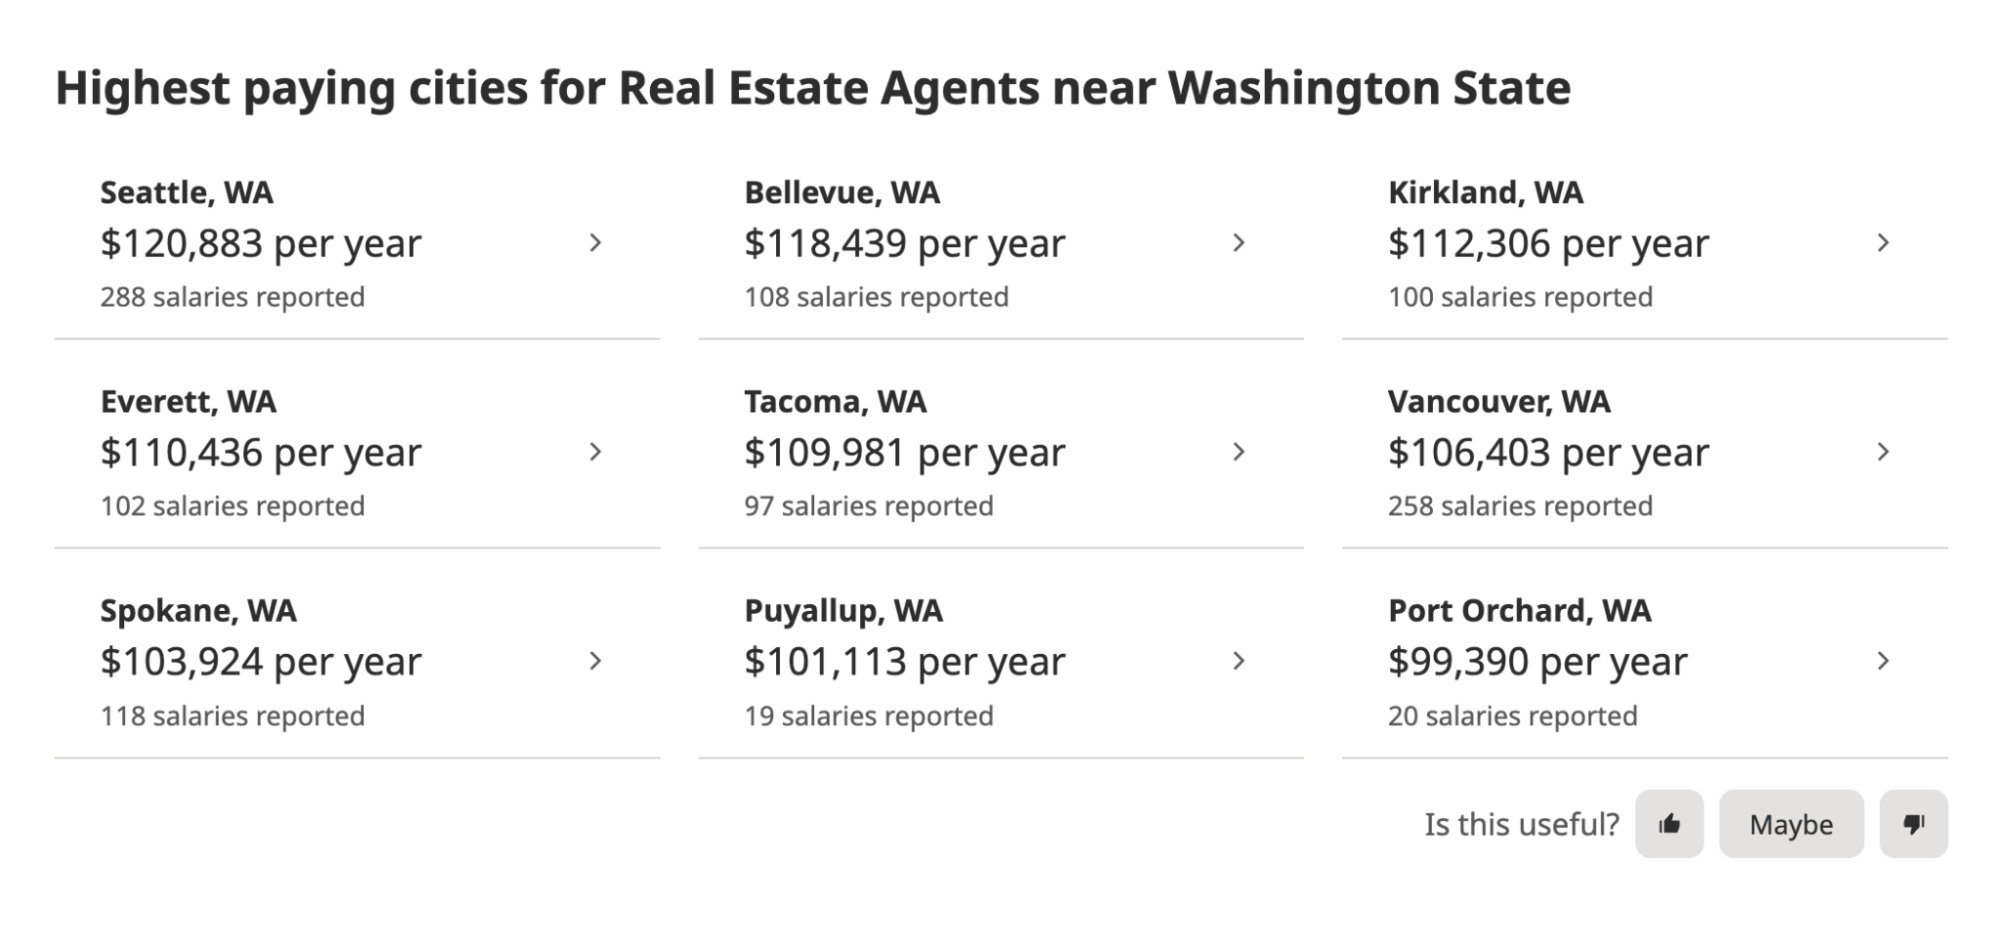 Information for highest paying cities for real estate agent in Washington.